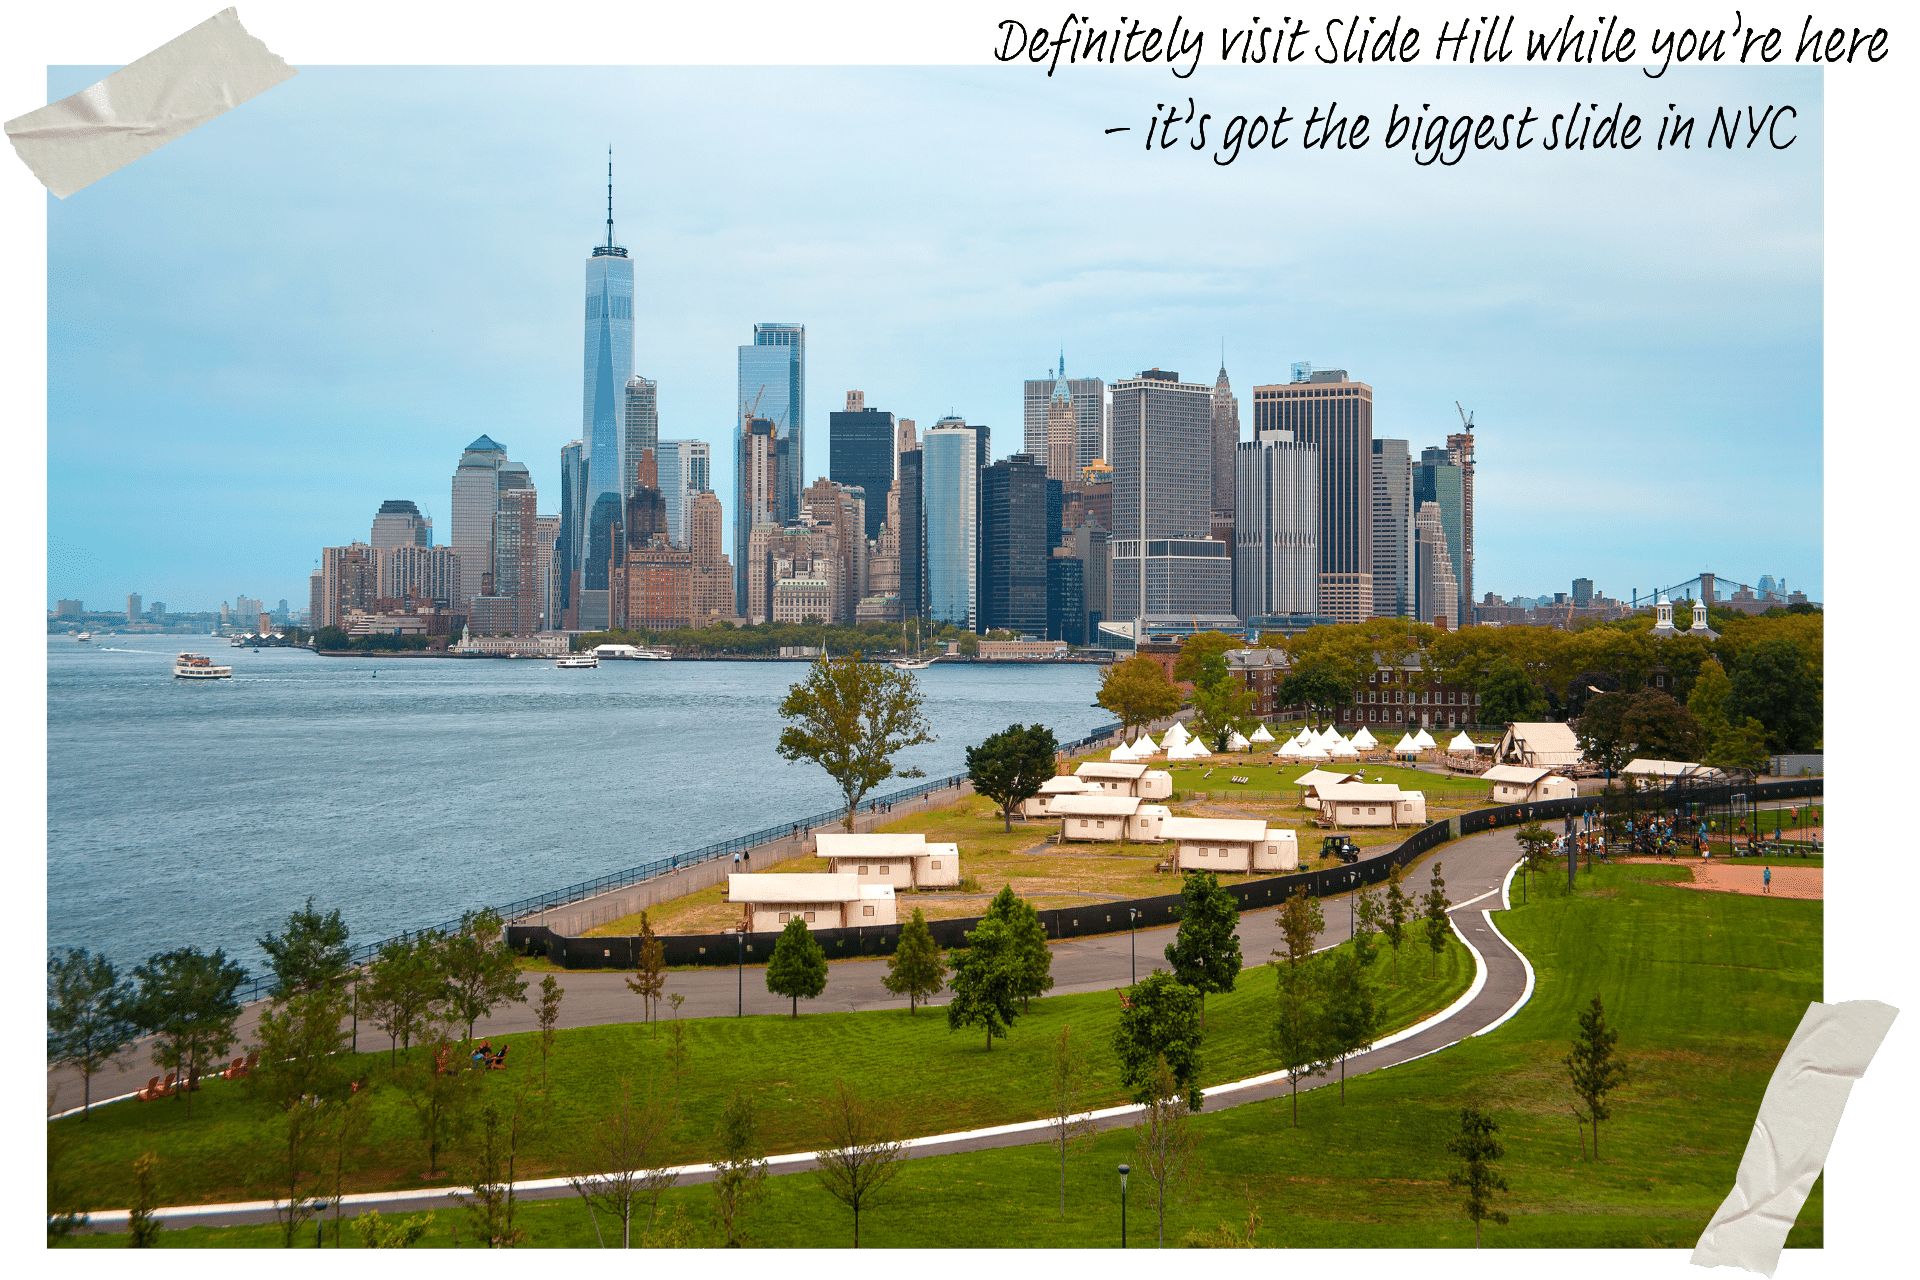 An overview of Governor's Island, with the Manhattan skyline in the background.